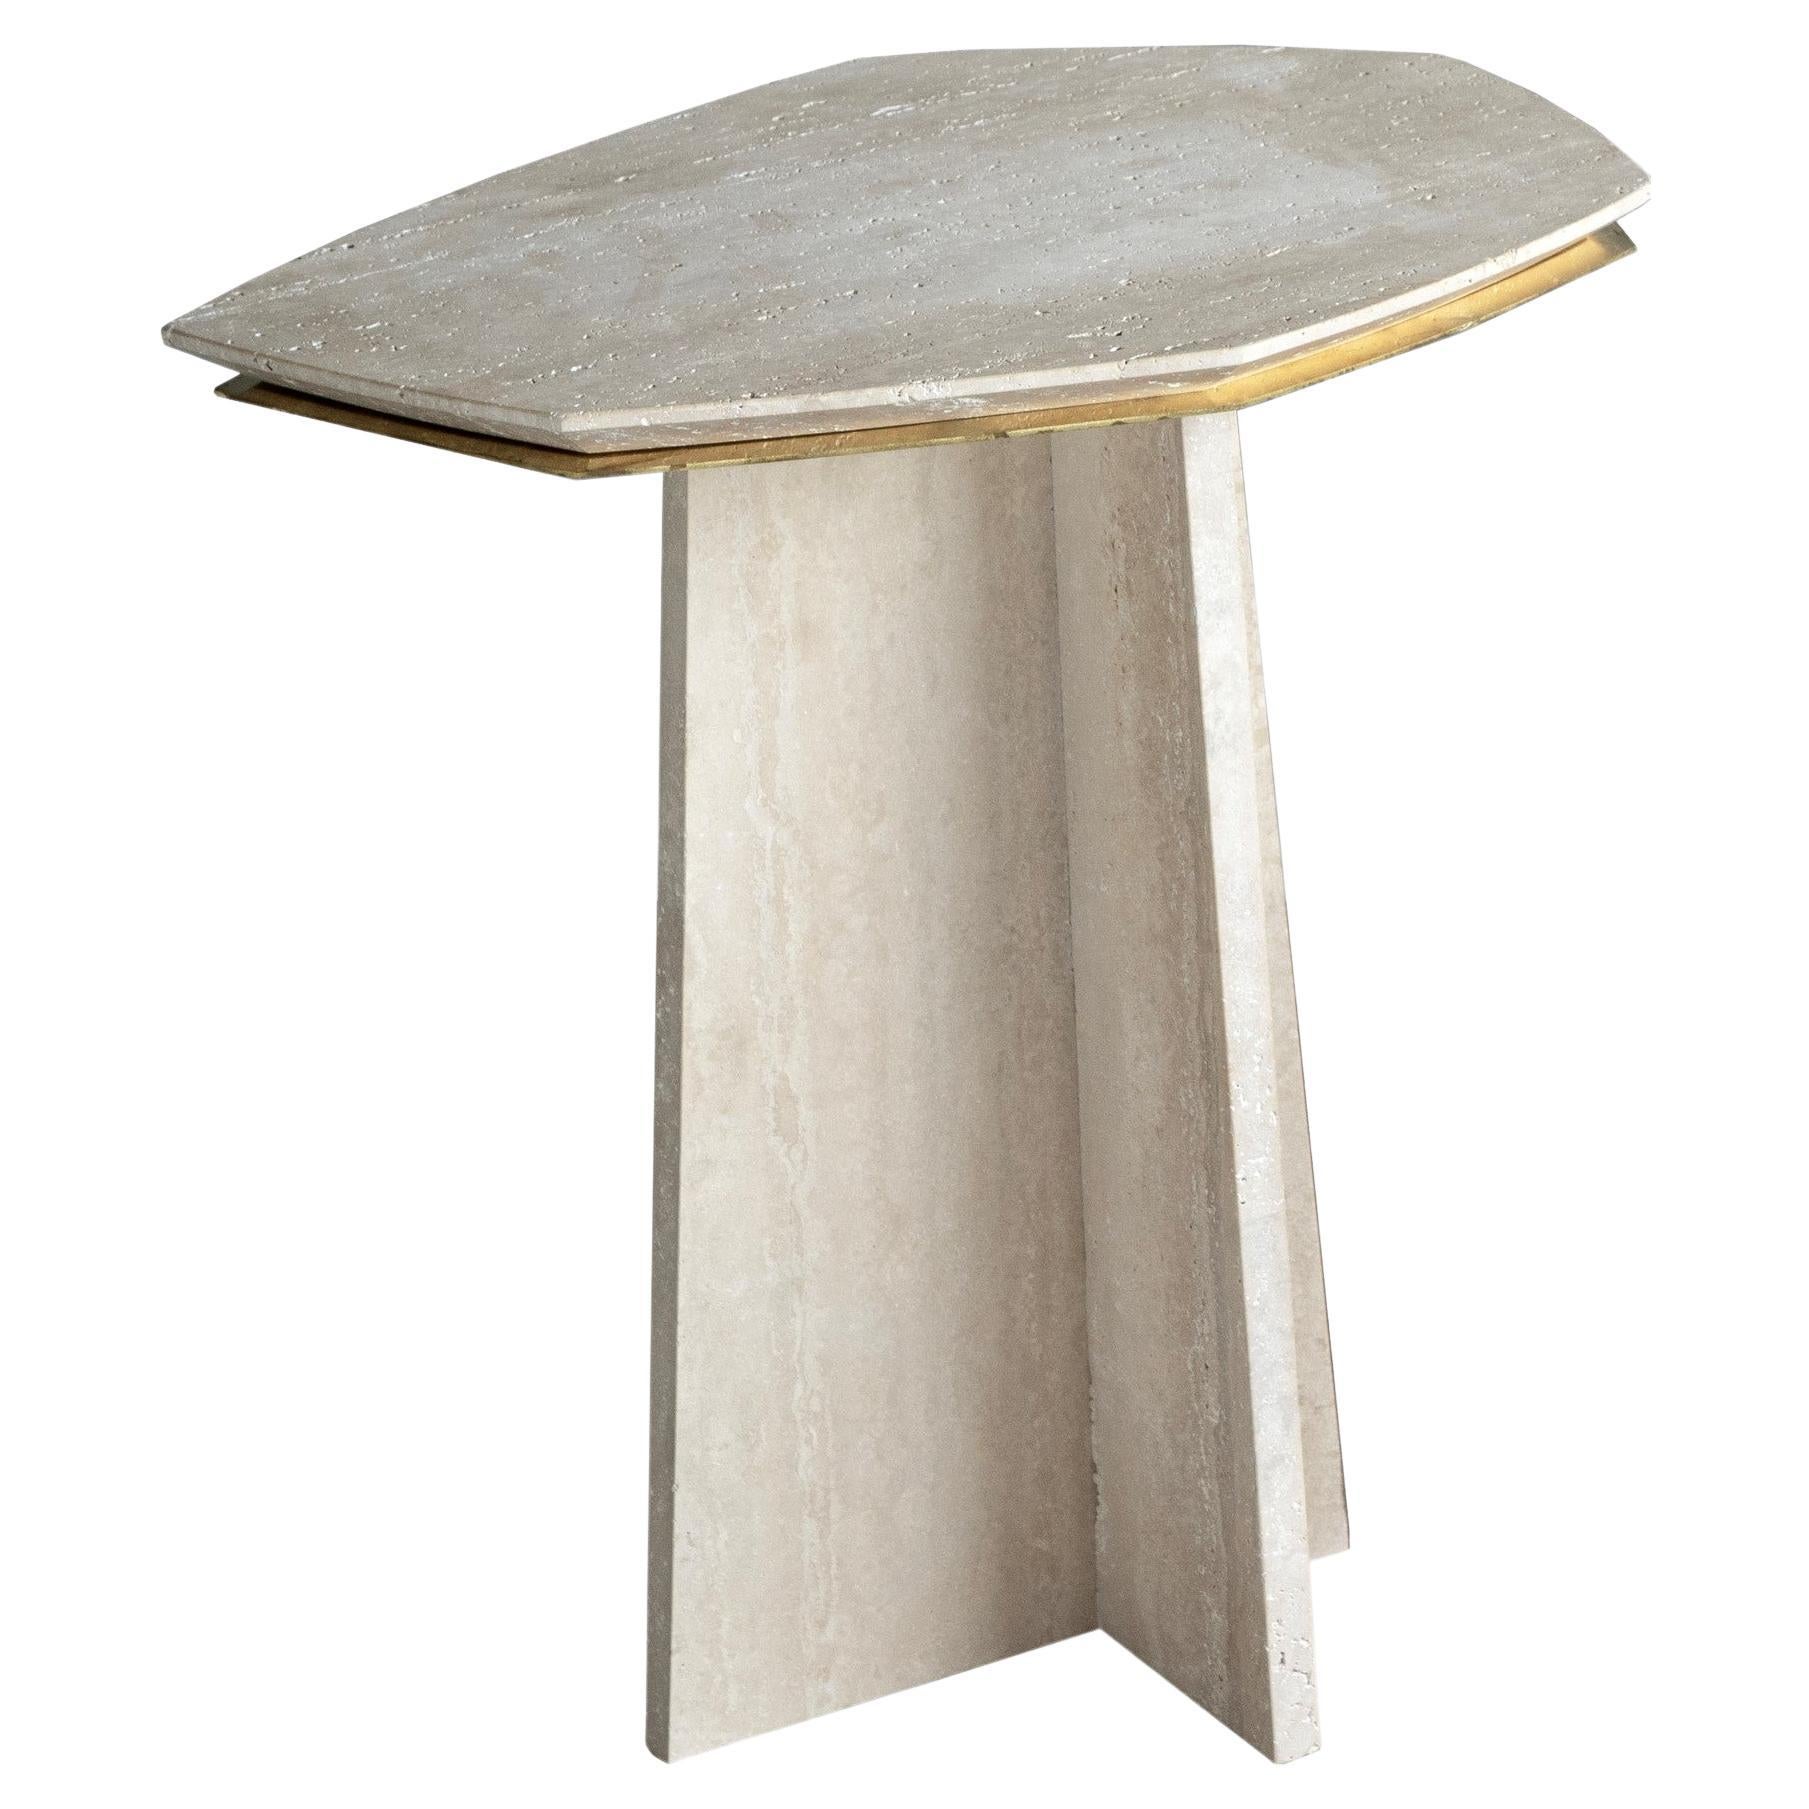 Large Geometrik Cantilever Coffee Table by Atra Design For Sale